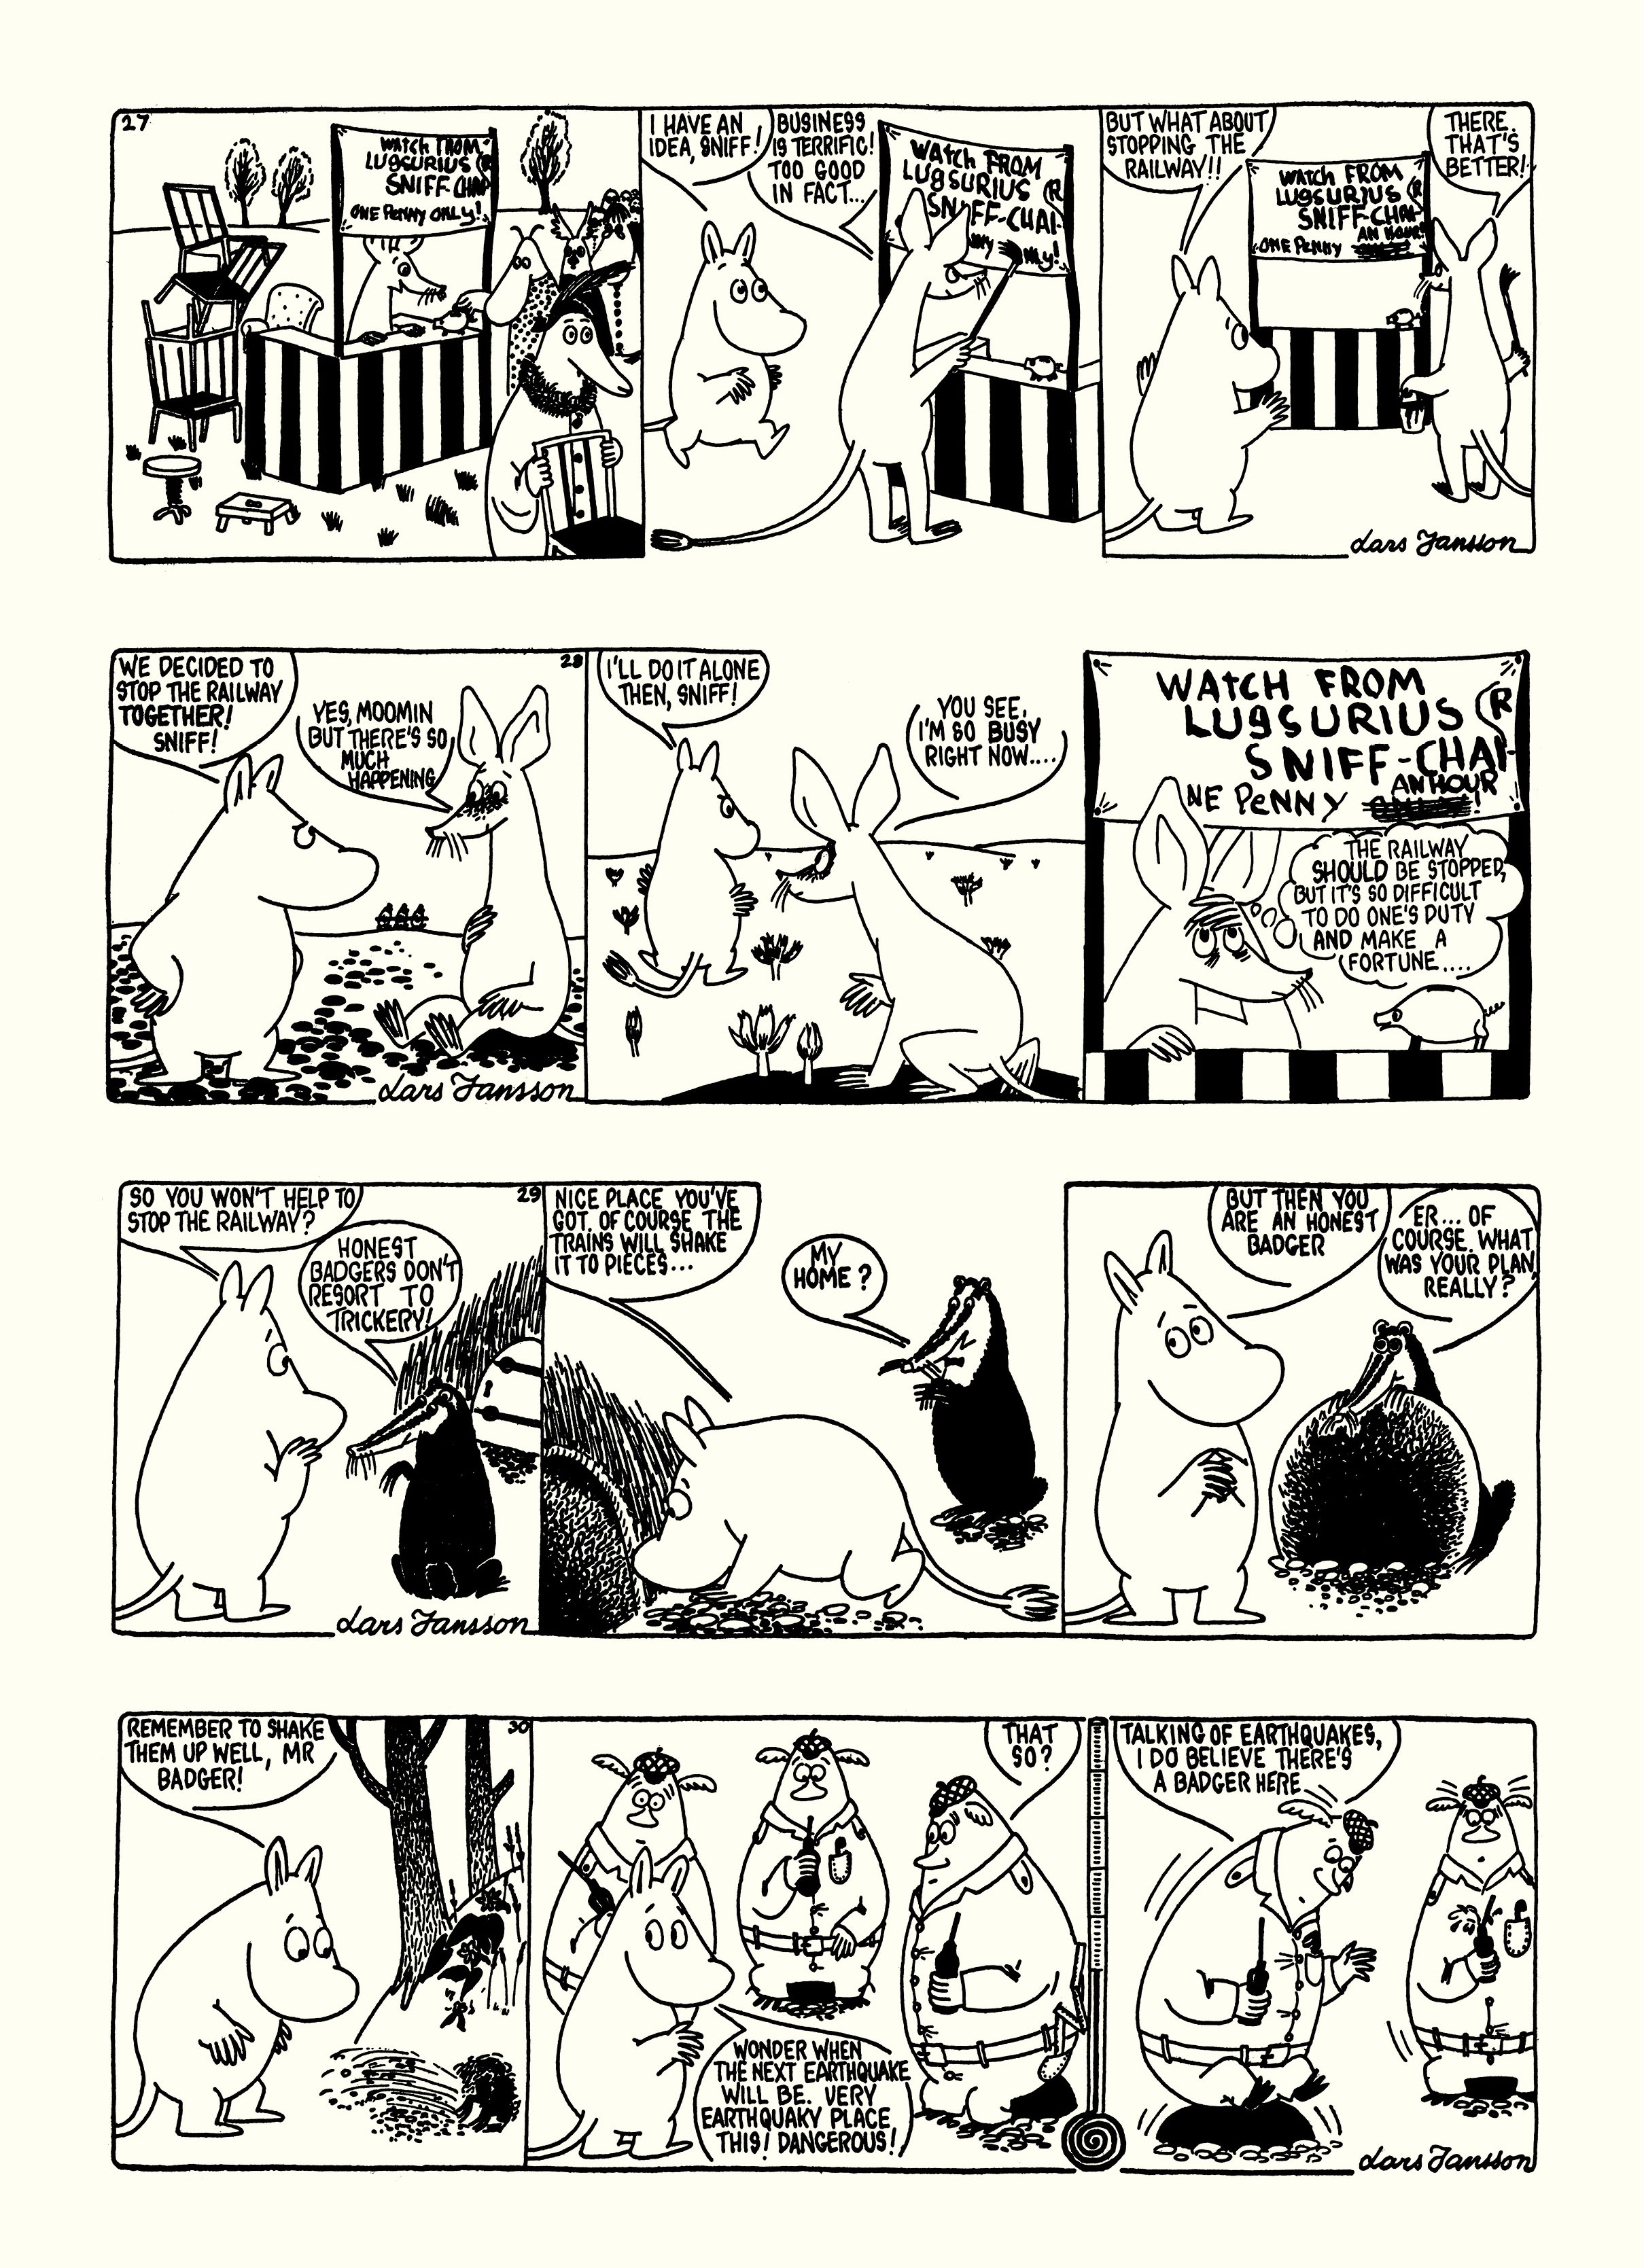 Read online Moomin: The Complete Lars Jansson Comic Strip comic -  Issue # TPB 6 - 33